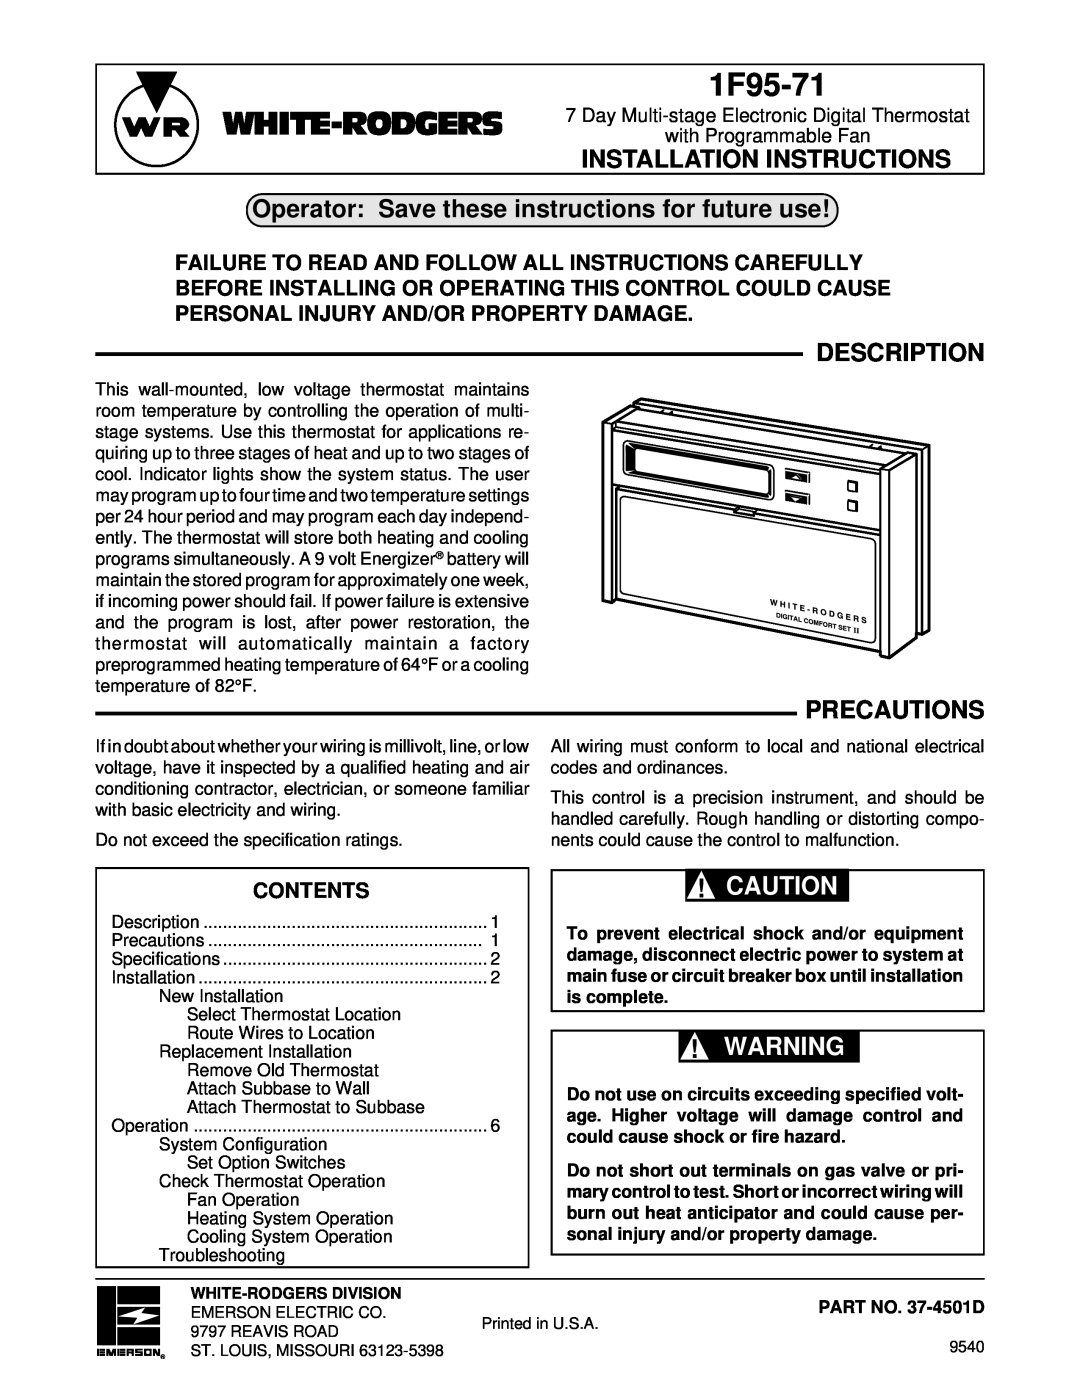 White Rodgers 1F95-71 installation instructions Operator Save these instructions for future use, Description, Precautions 